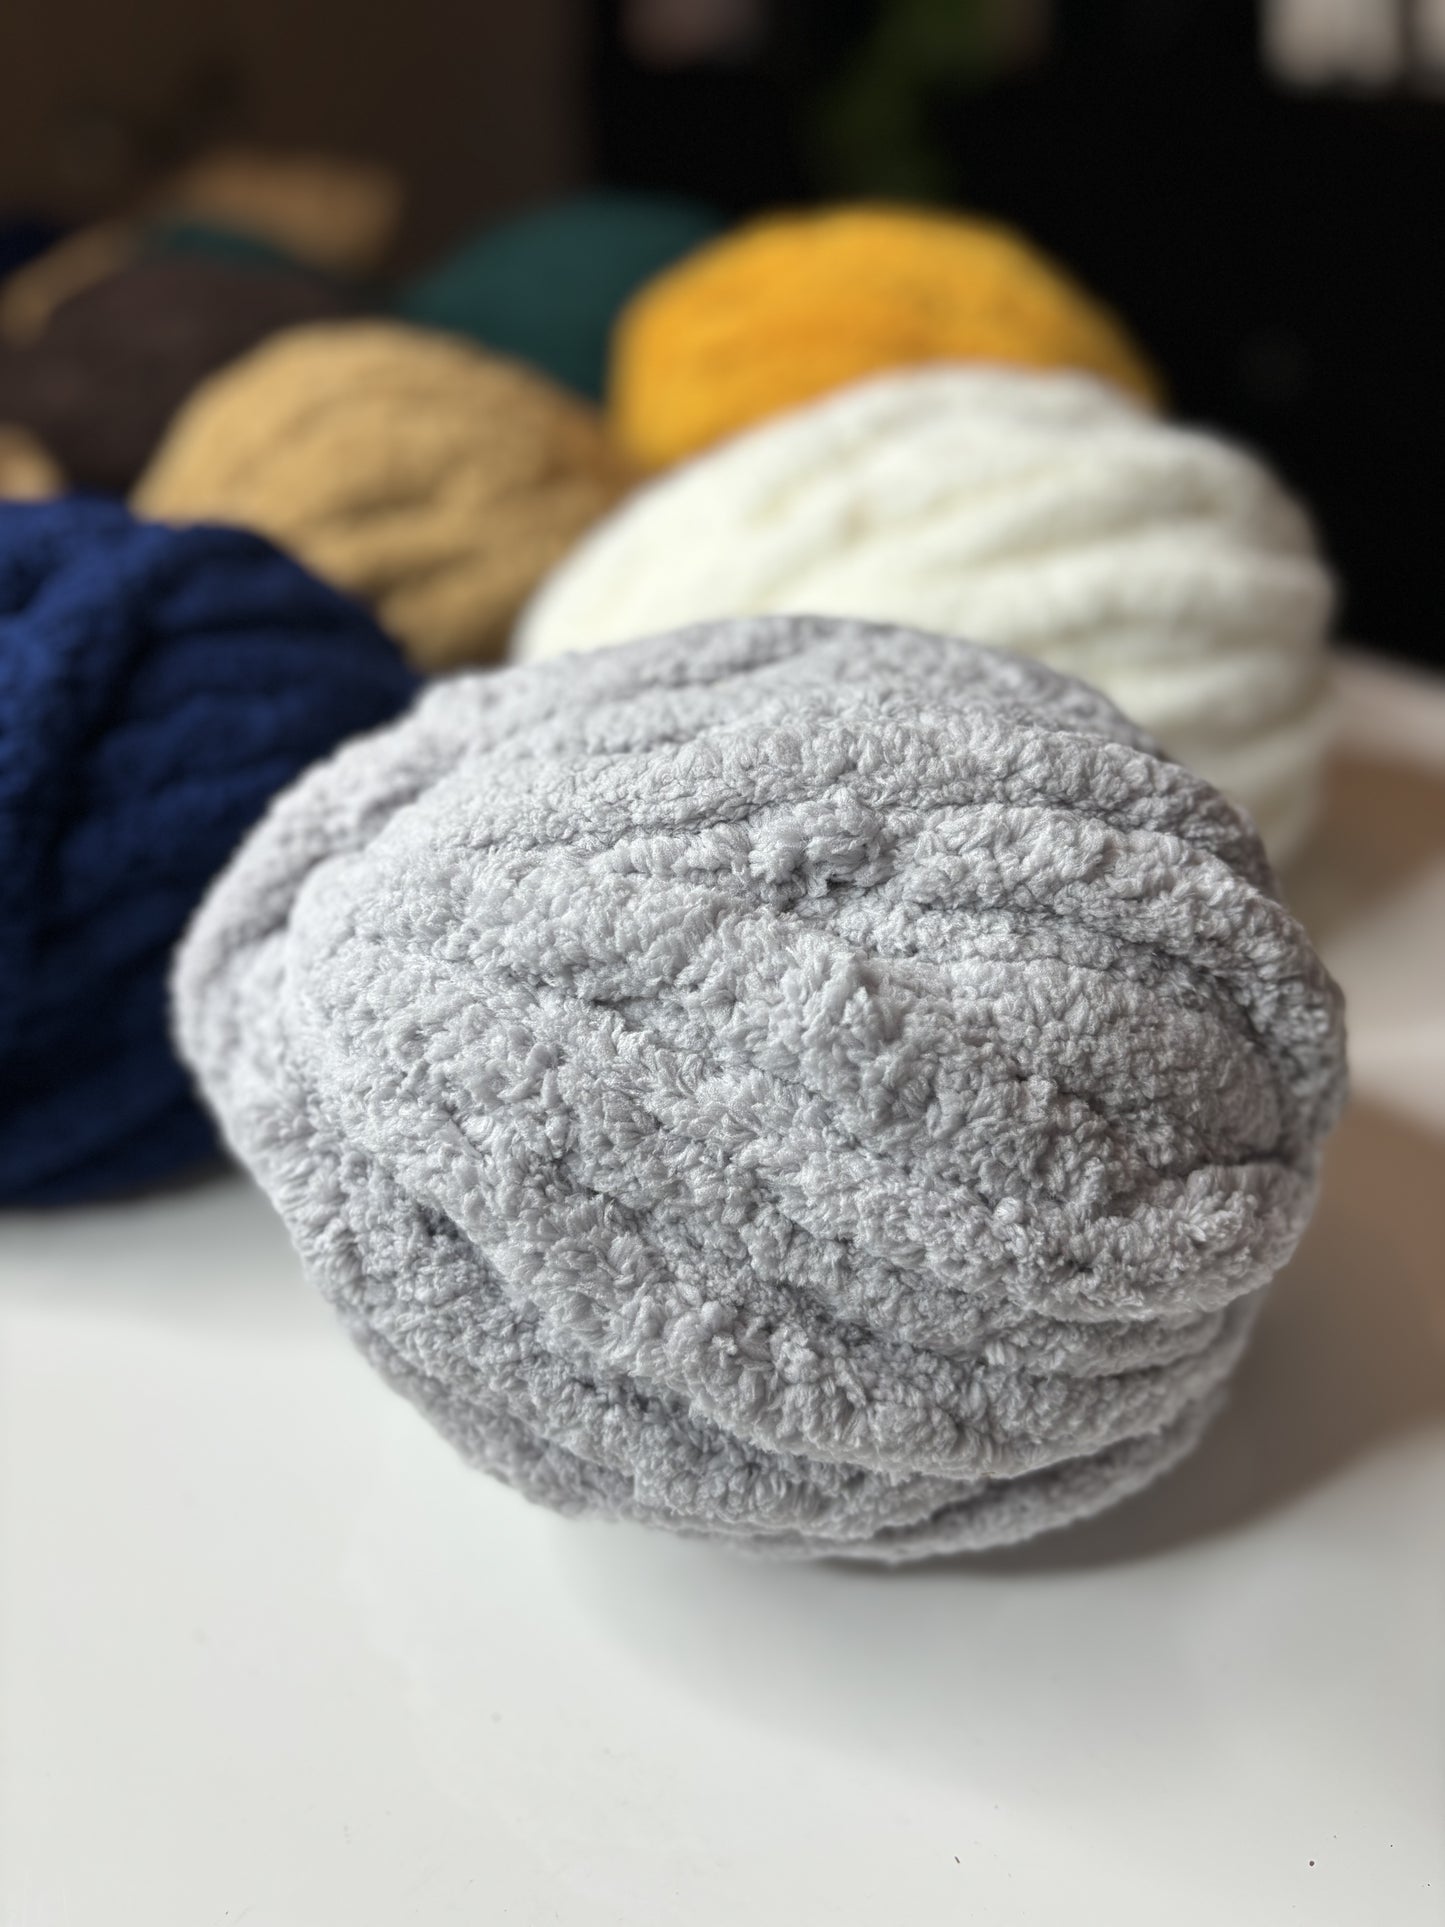 Premium Chunky Yarn for Cozy Blankets - Rare Colors Available!